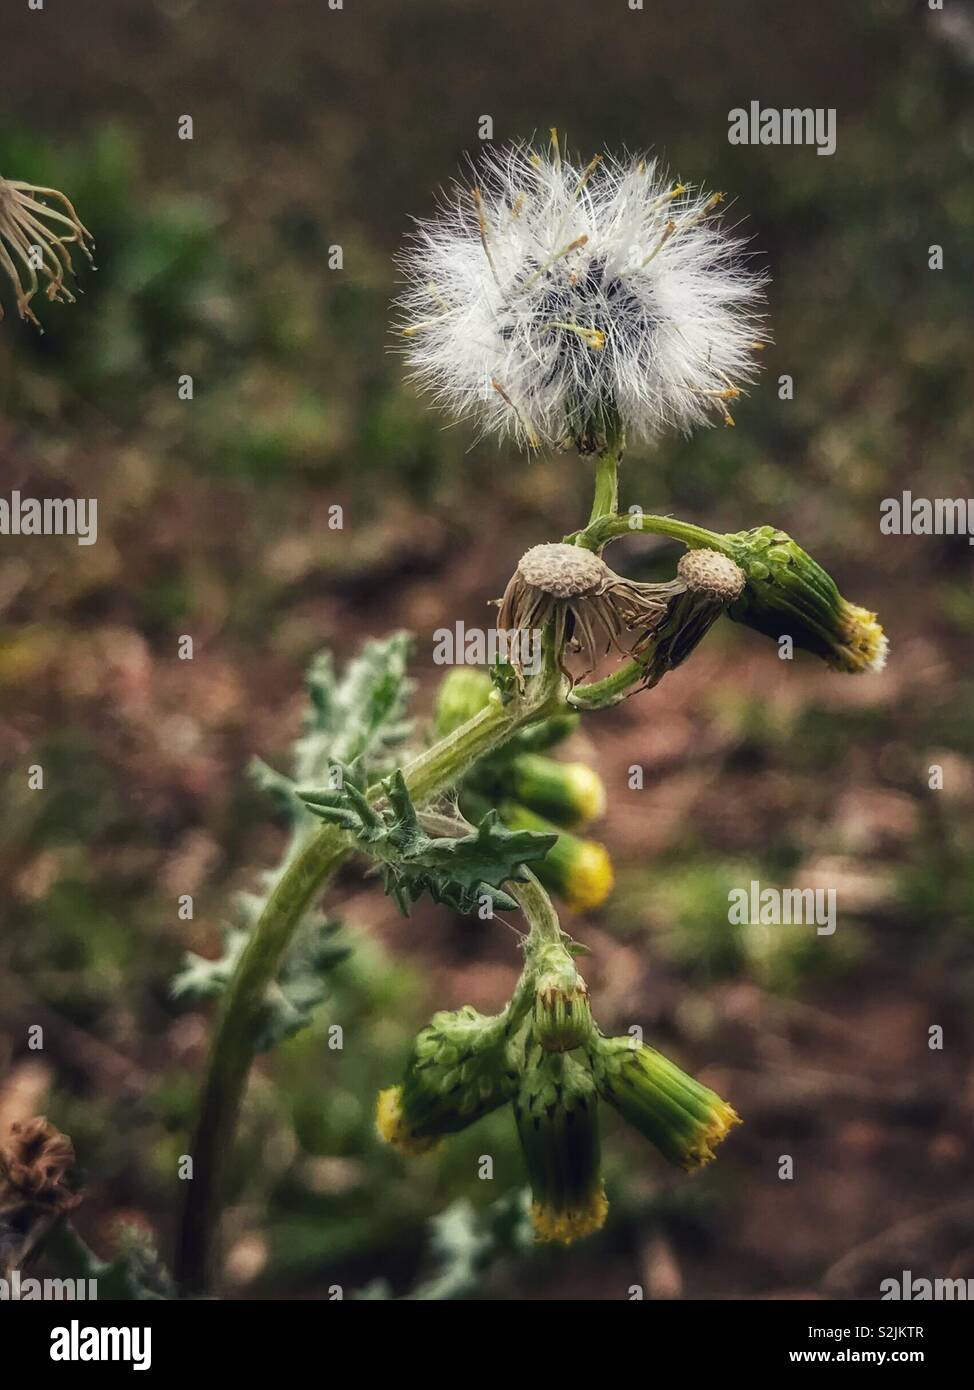 Dandelion-like seedhead, Sonchus oleraceus stands in field in early spring Stock Photo